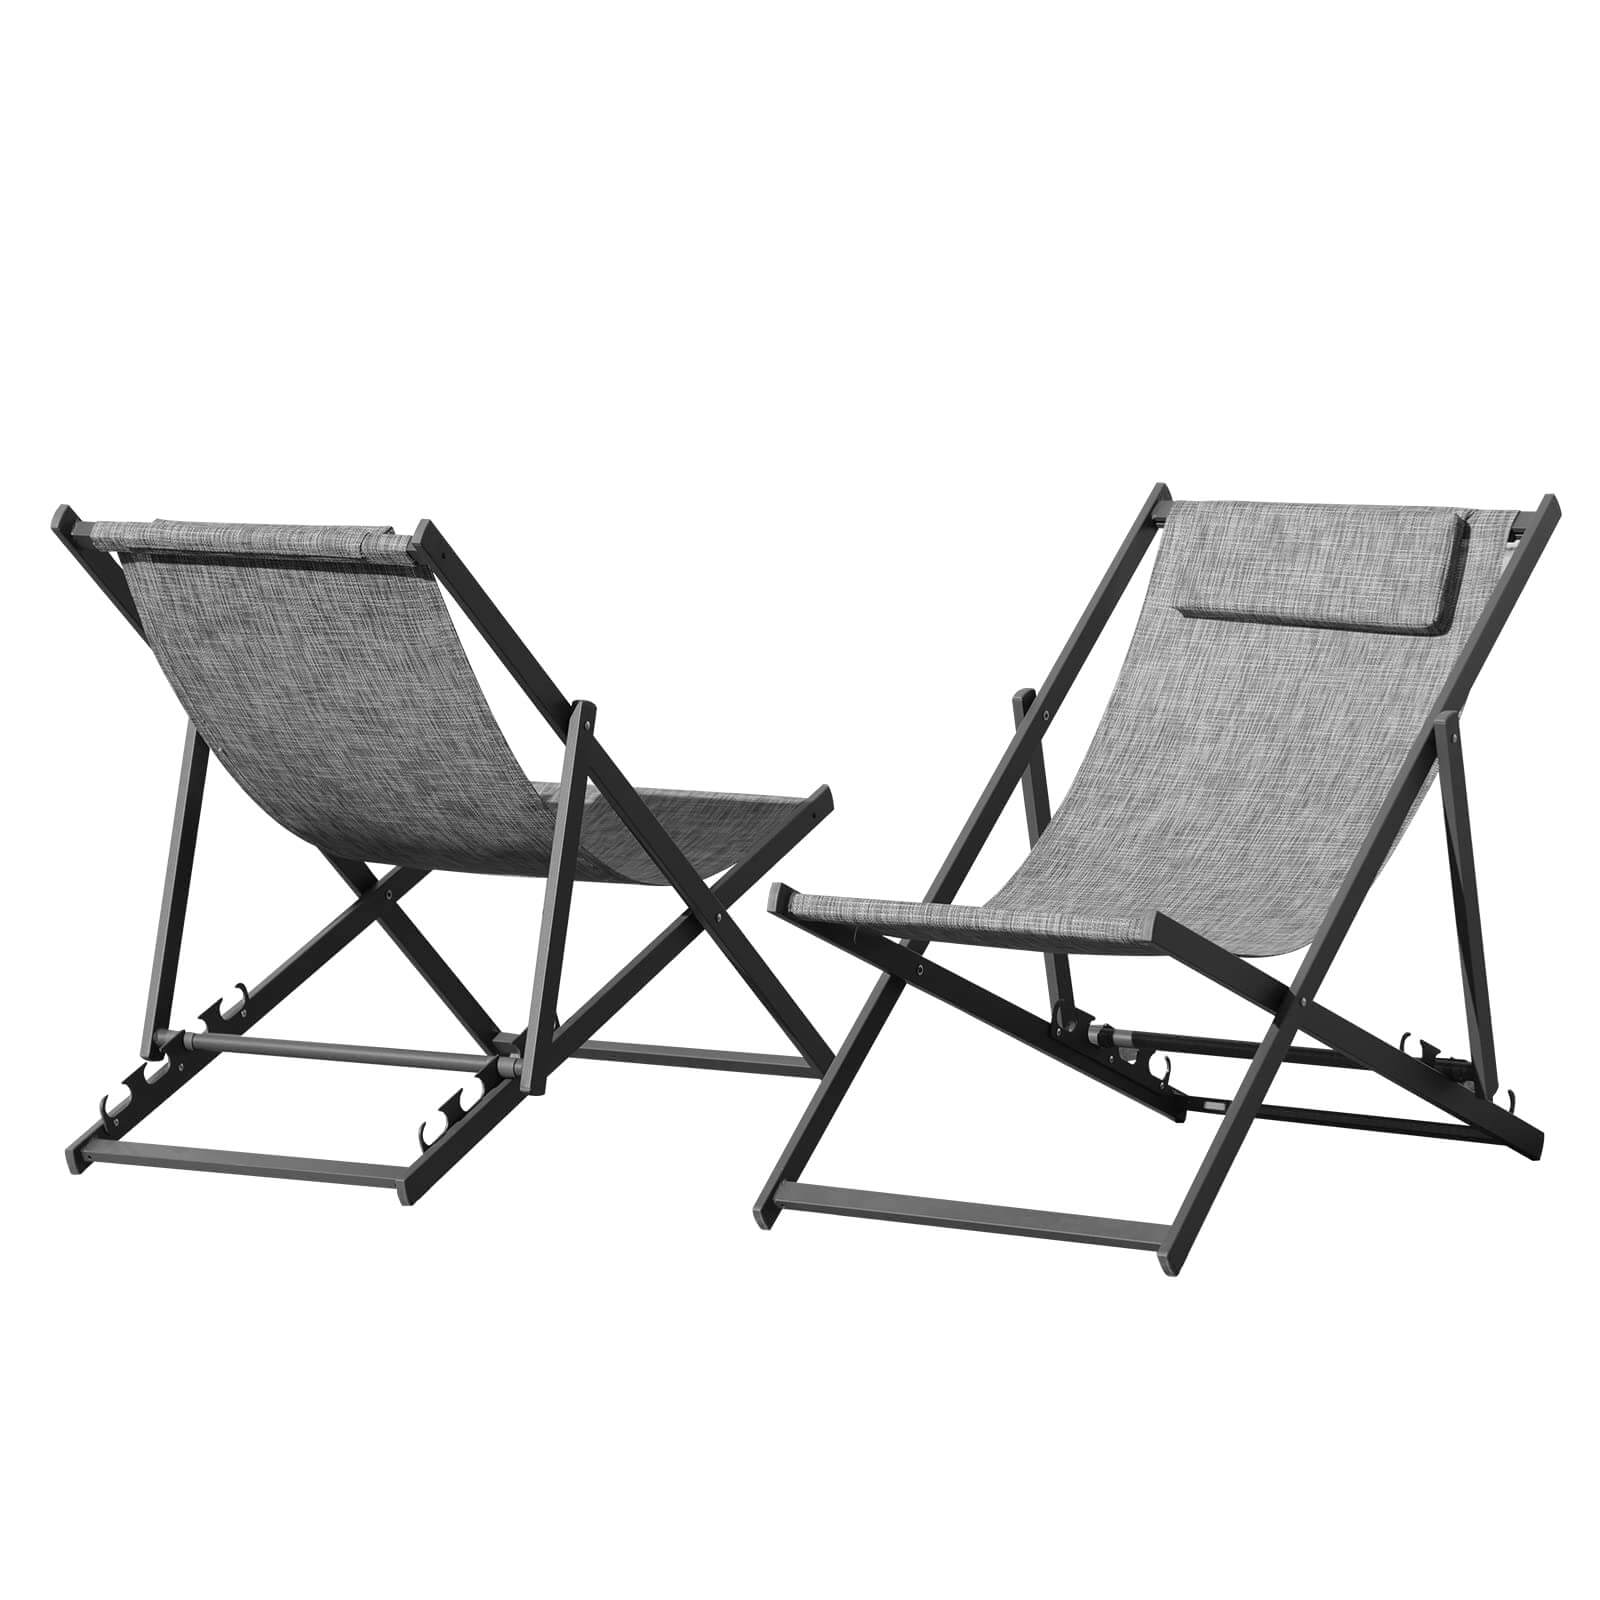 Patio Sling Chairs, Outdoor Folding Beach Sling Chair Set of 2, Aluminum Portable Chaise Lounge Chairs